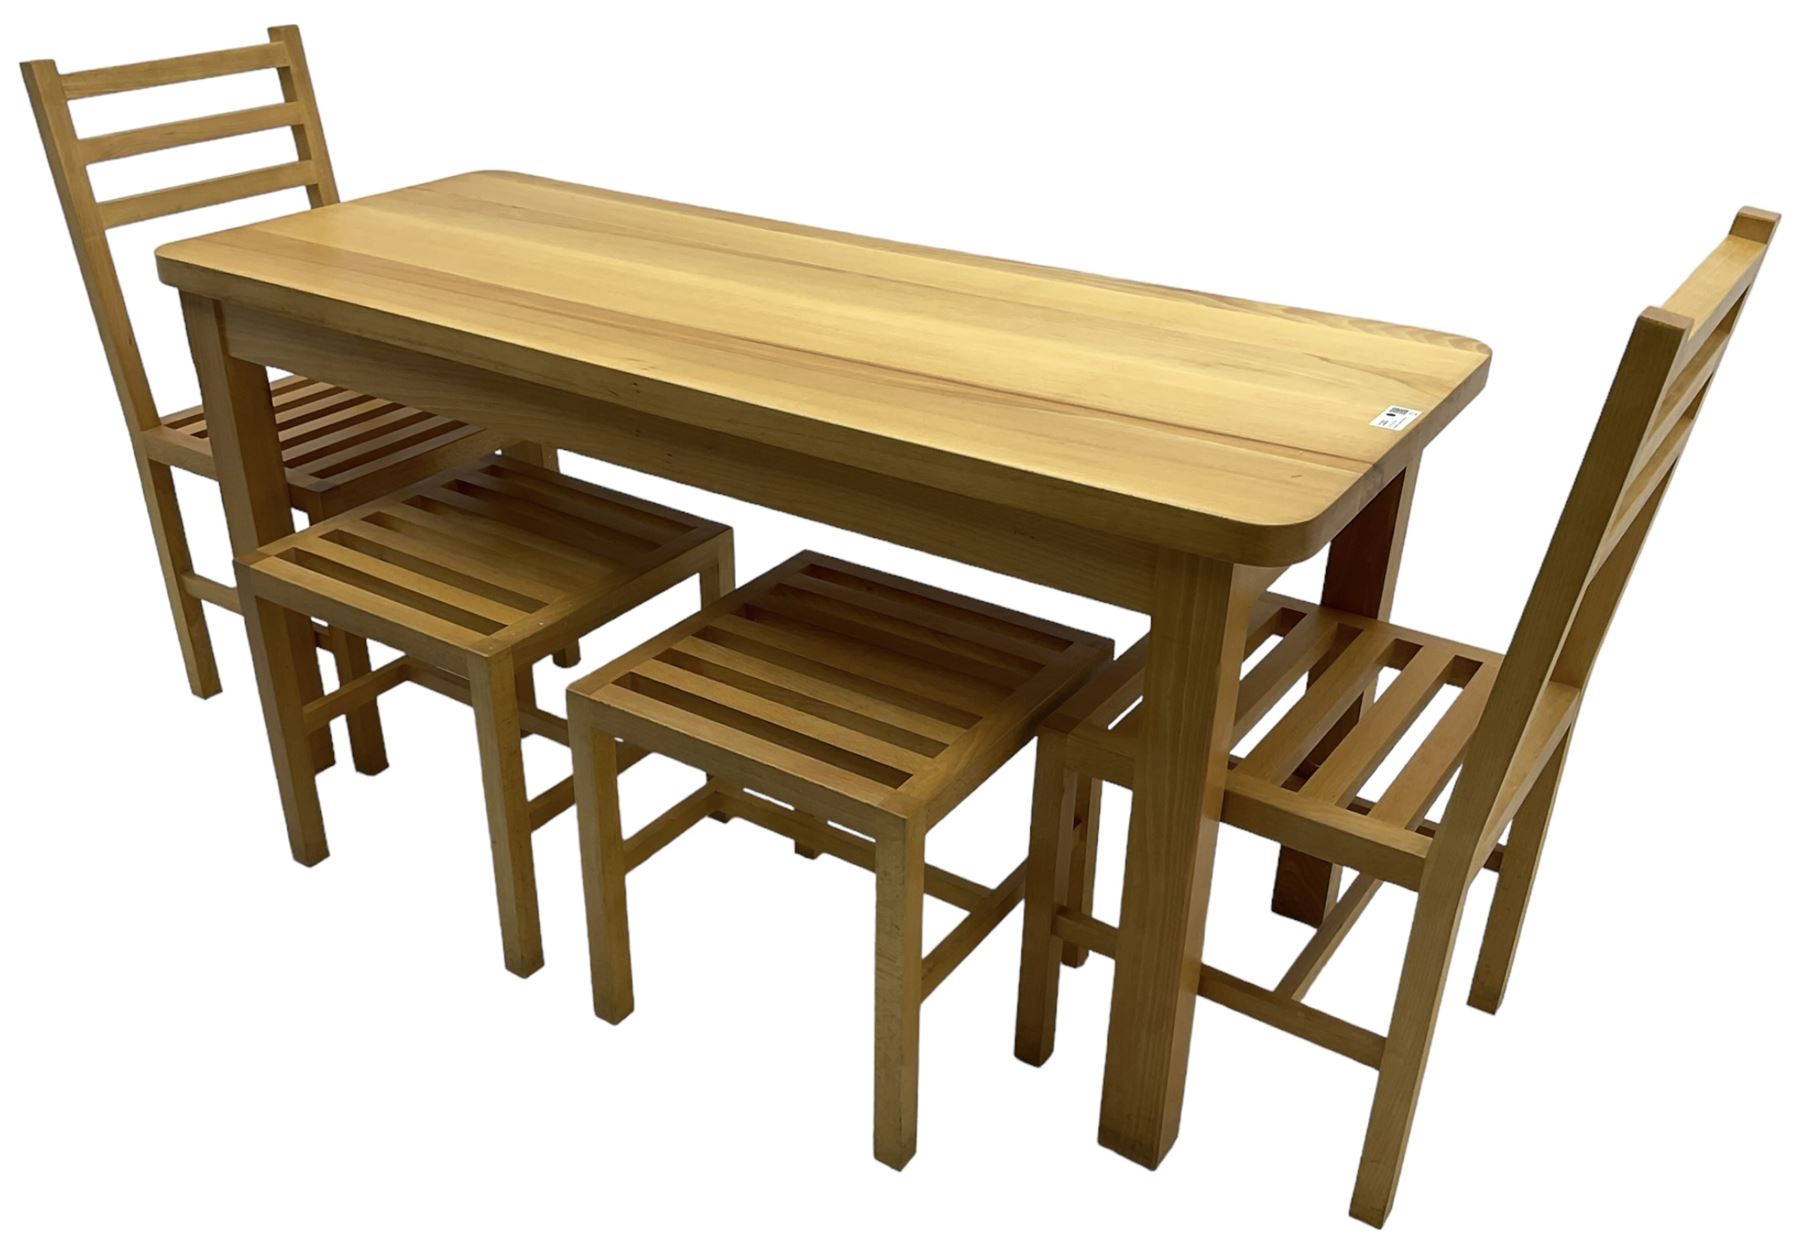 Light beech rectangular dining table; together with two chairs and two stools - Image 2 of 6